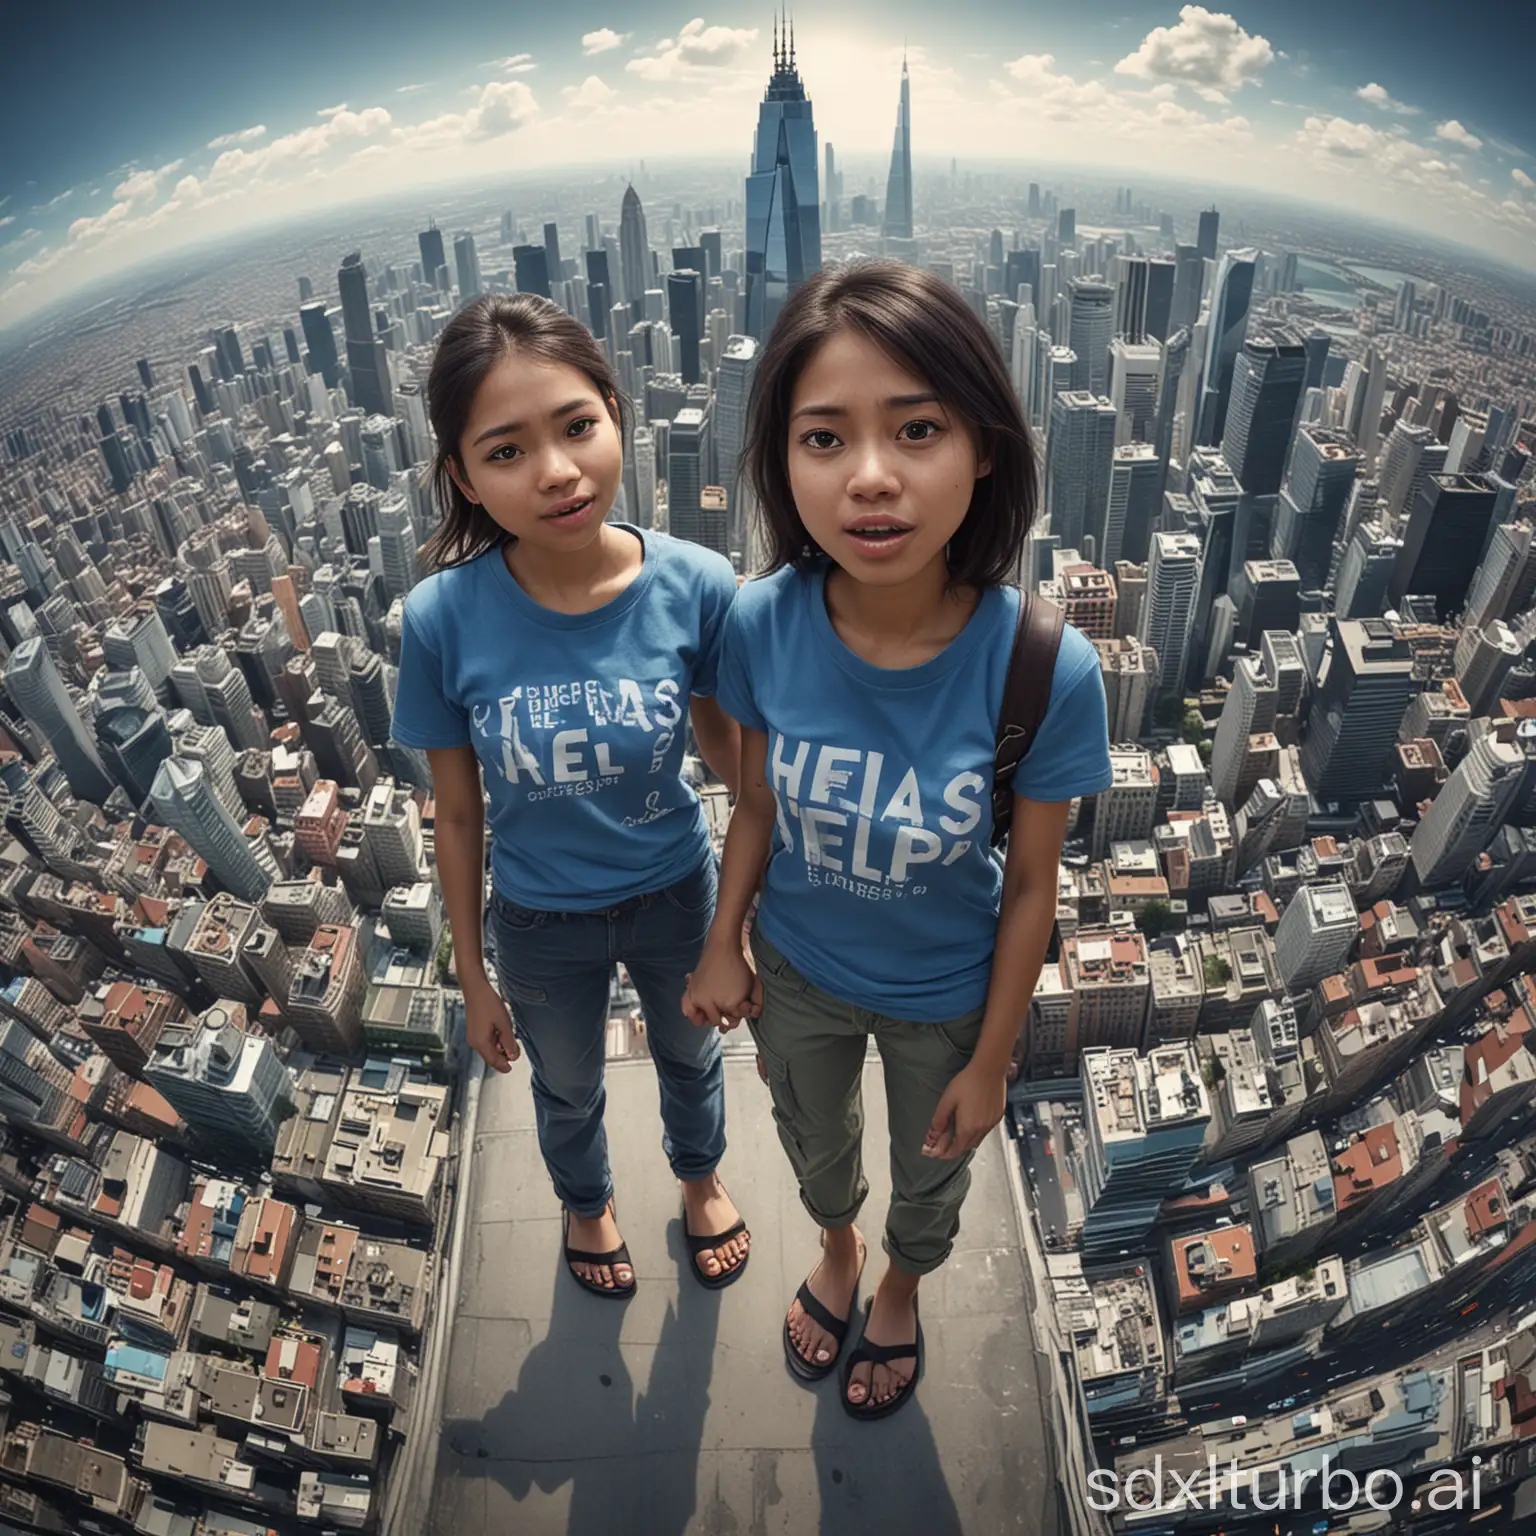 Indonesian-Girl-Puzzled-Atop-Tallest-Building-Seeking-Help